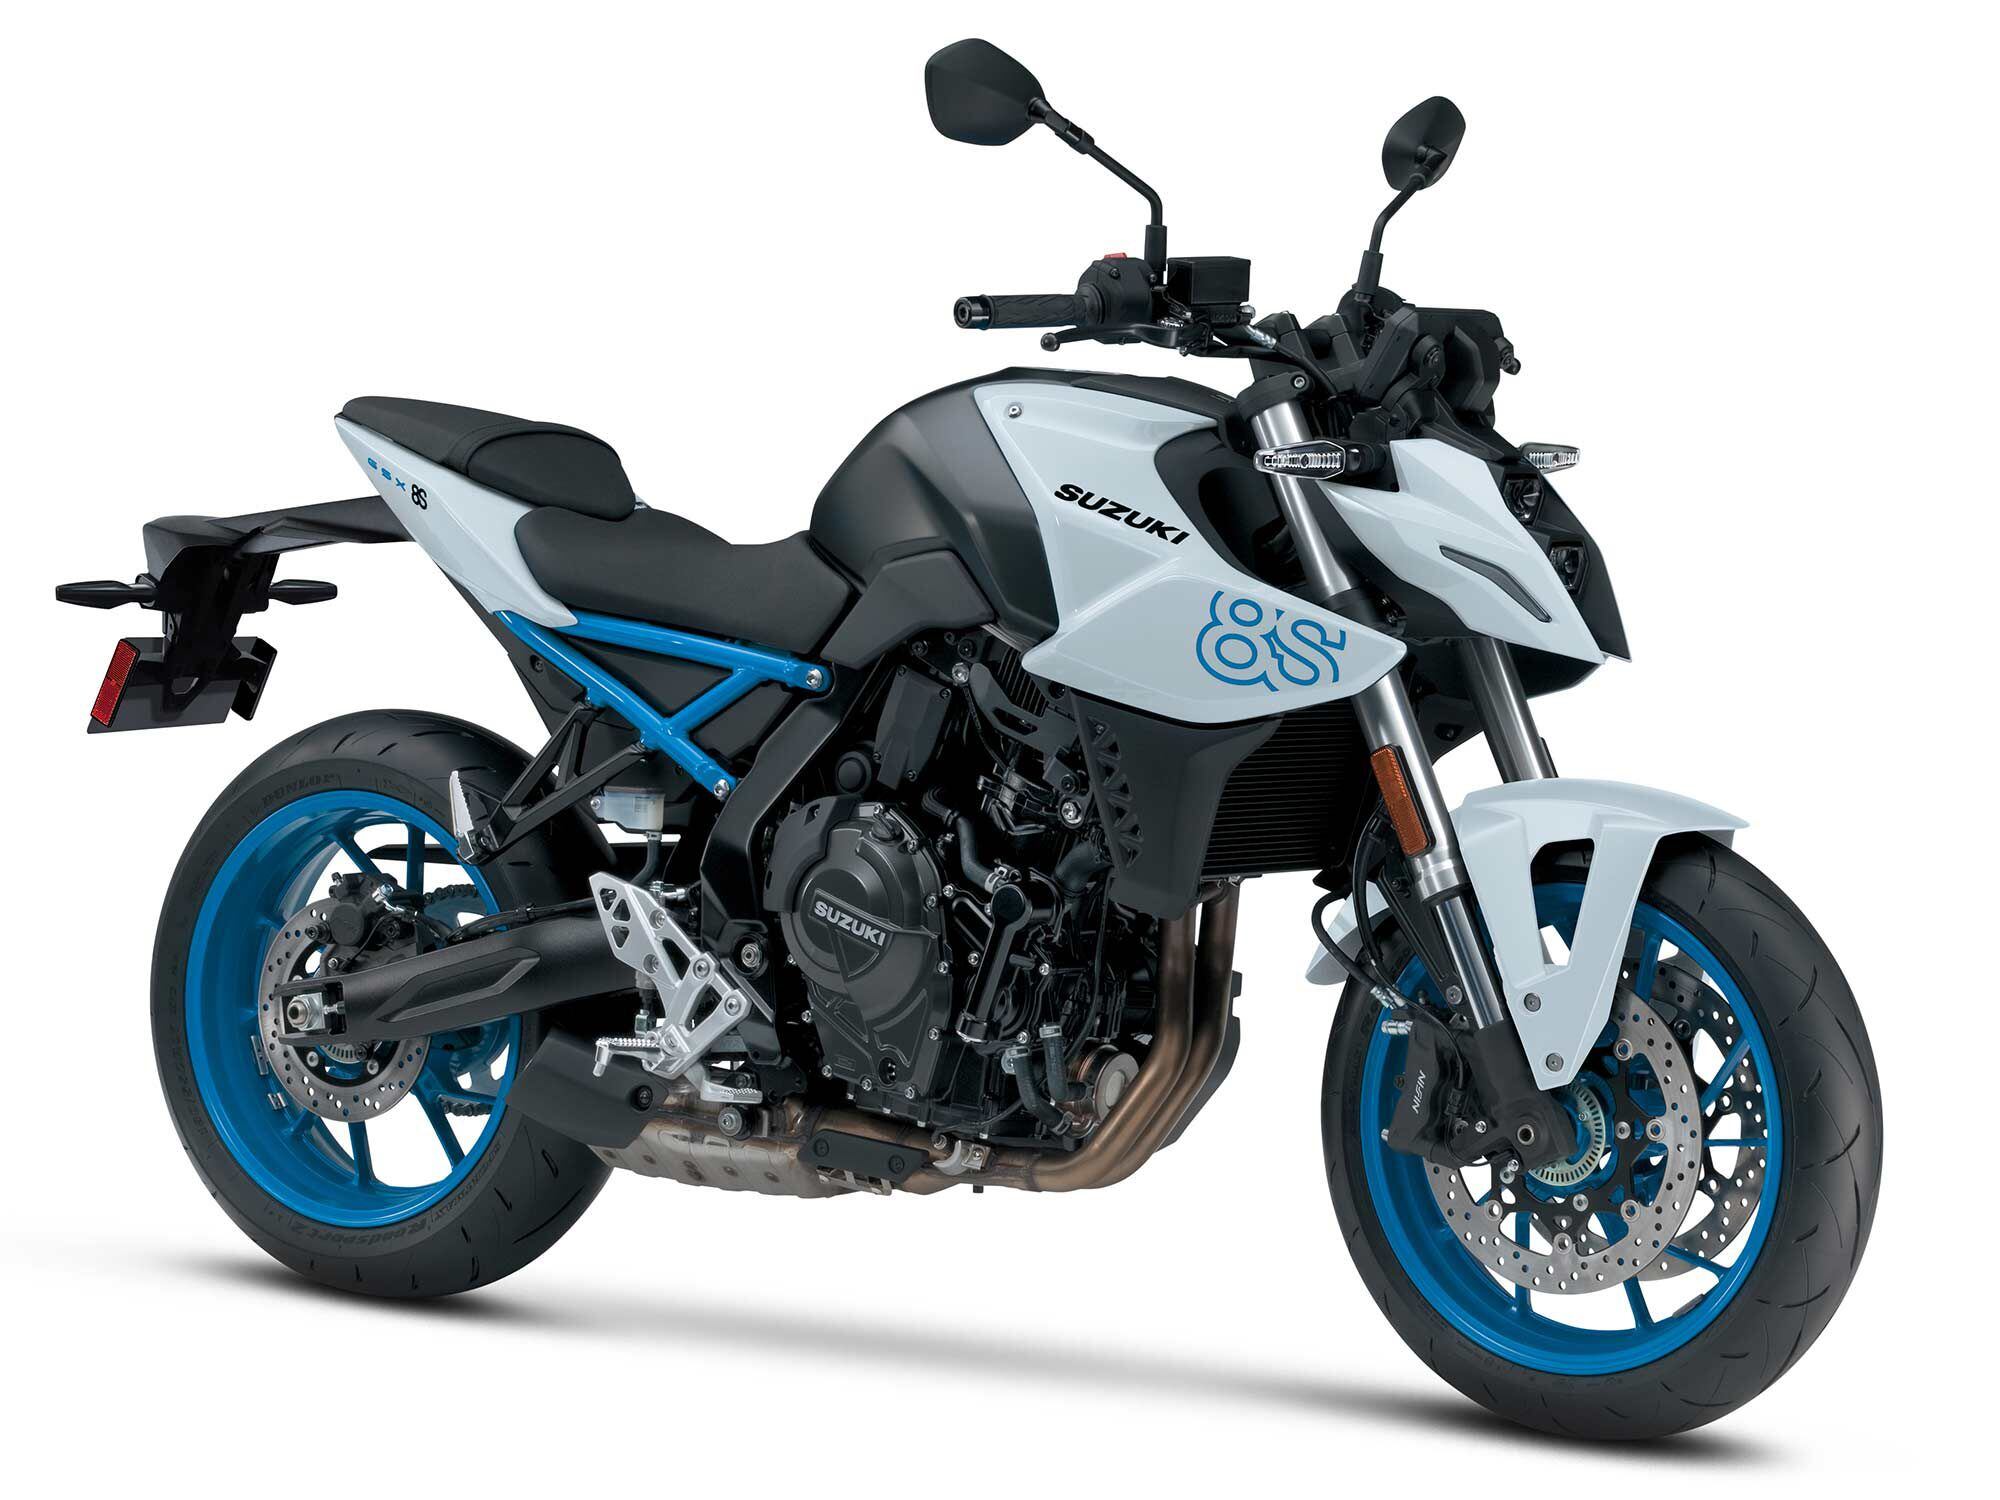 The GSX-8S is available in three color options: white with blue wheels and subframe (seen here), blue with blue wheels and subframe, and all black.